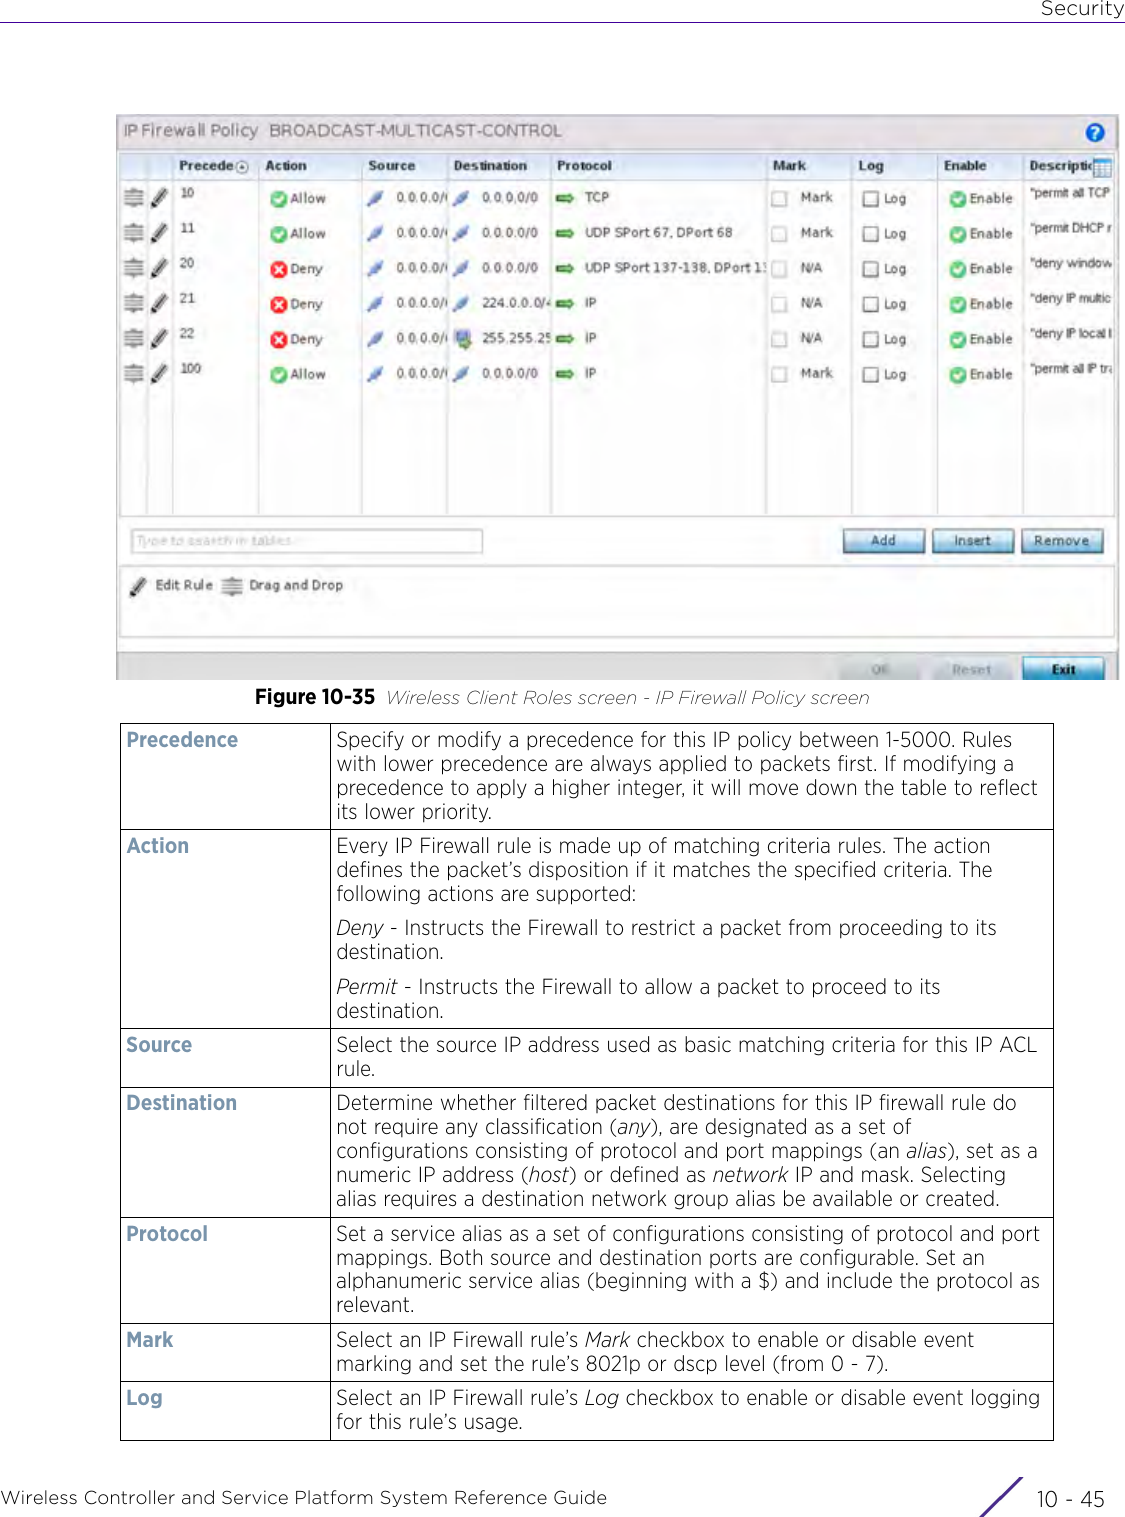 SecurityWireless Controller and Service Platform System Reference Guide 10 - 45Figure 10-35 Wireless Client Roles screen - IP Firewall Policy screenPrecedence  Specify or modify a precedence for this IP policy between 1-5000. Rules with lower precedence are always applied to packets first. If modifying a precedence to apply a higher integer, it will move down the table to reflect its lower priority.Action Every IP Firewall rule is made up of matching criteria rules. The action defines the packet’s disposition if it matches the specified criteria. The following actions are supported:Deny - Instructs the Firewall to restrict a packet from proceeding to its destination.Permit - Instructs the Firewall to allow a packet to proceed to its destination.Source Select the source IP address used as basic matching criteria for this IP ACL rule.Destination Determine whether filtered packet destinations for this IP firewall rule do not require any classification (any), are designated as a set of configurations consisting of protocol and port mappings (an alias), set as a numeric IP address (host) or defined as network IP and mask. Selecting alias requires a destination network group alias be available or created. Protocol Set a service alias as a set of configurations consisting of protocol and port mappings. Both source and destination ports are configurable. Set an alphanumeric service alias (beginning with a $) and include the protocol as relevant.Mark Select an IP Firewall rule’s Mark checkbox to enable or disable event marking and set the rule’s 8021p or dscp level (from 0 - 7).Log  Select an IP Firewall rule’s Log checkbox to enable or disable event logging for this rule’s usage.